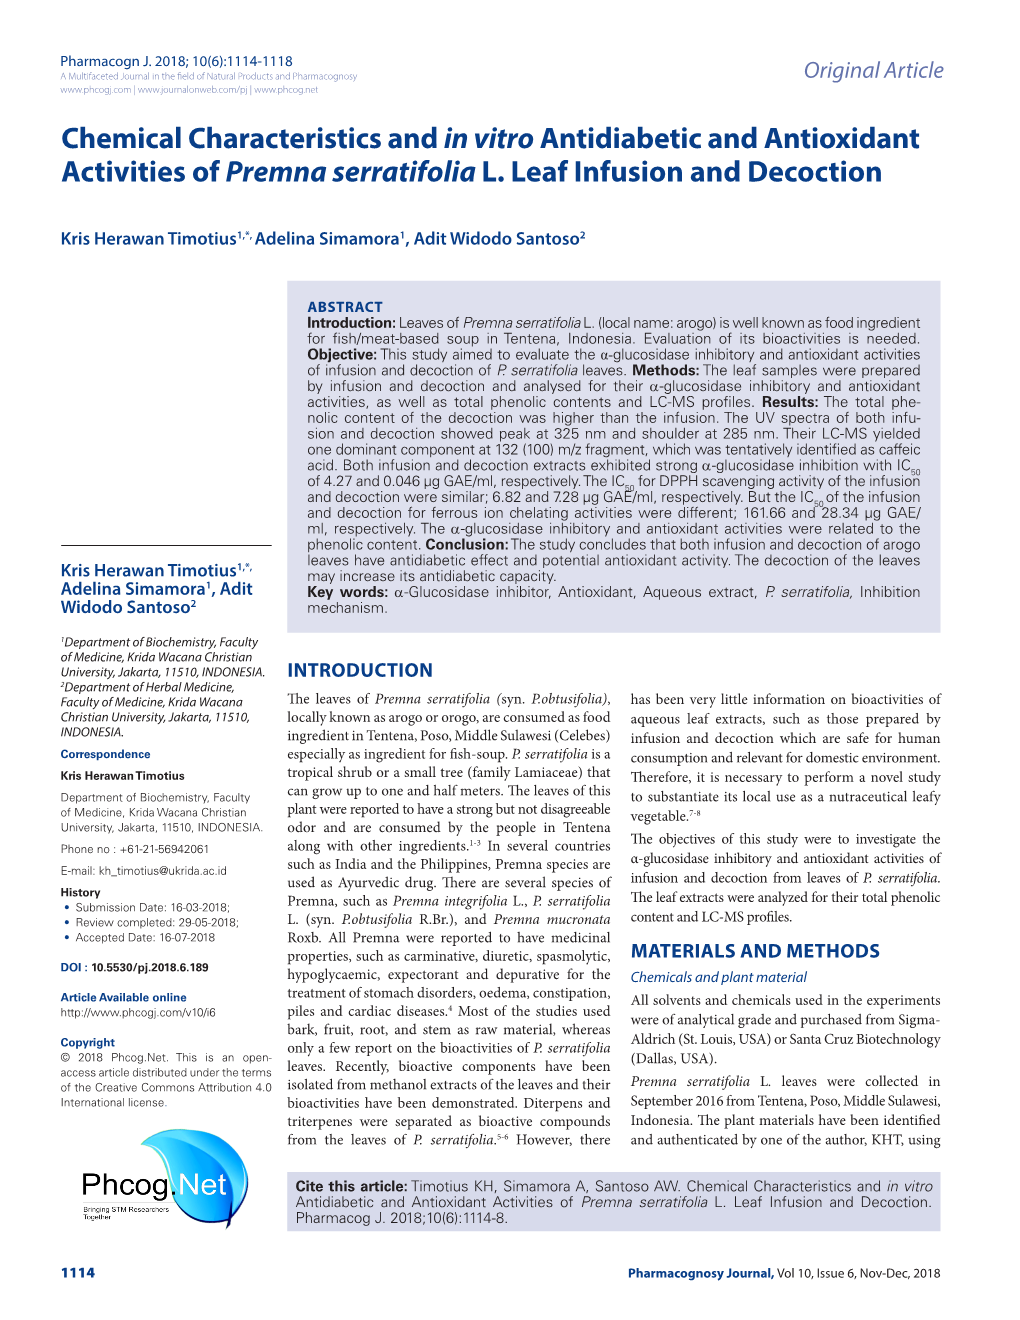 Chemical Characteristics and in Vitro Antidiabetic and Antioxidant Activities of Premna Serratifolia L. Leaf Infusion and Decoction